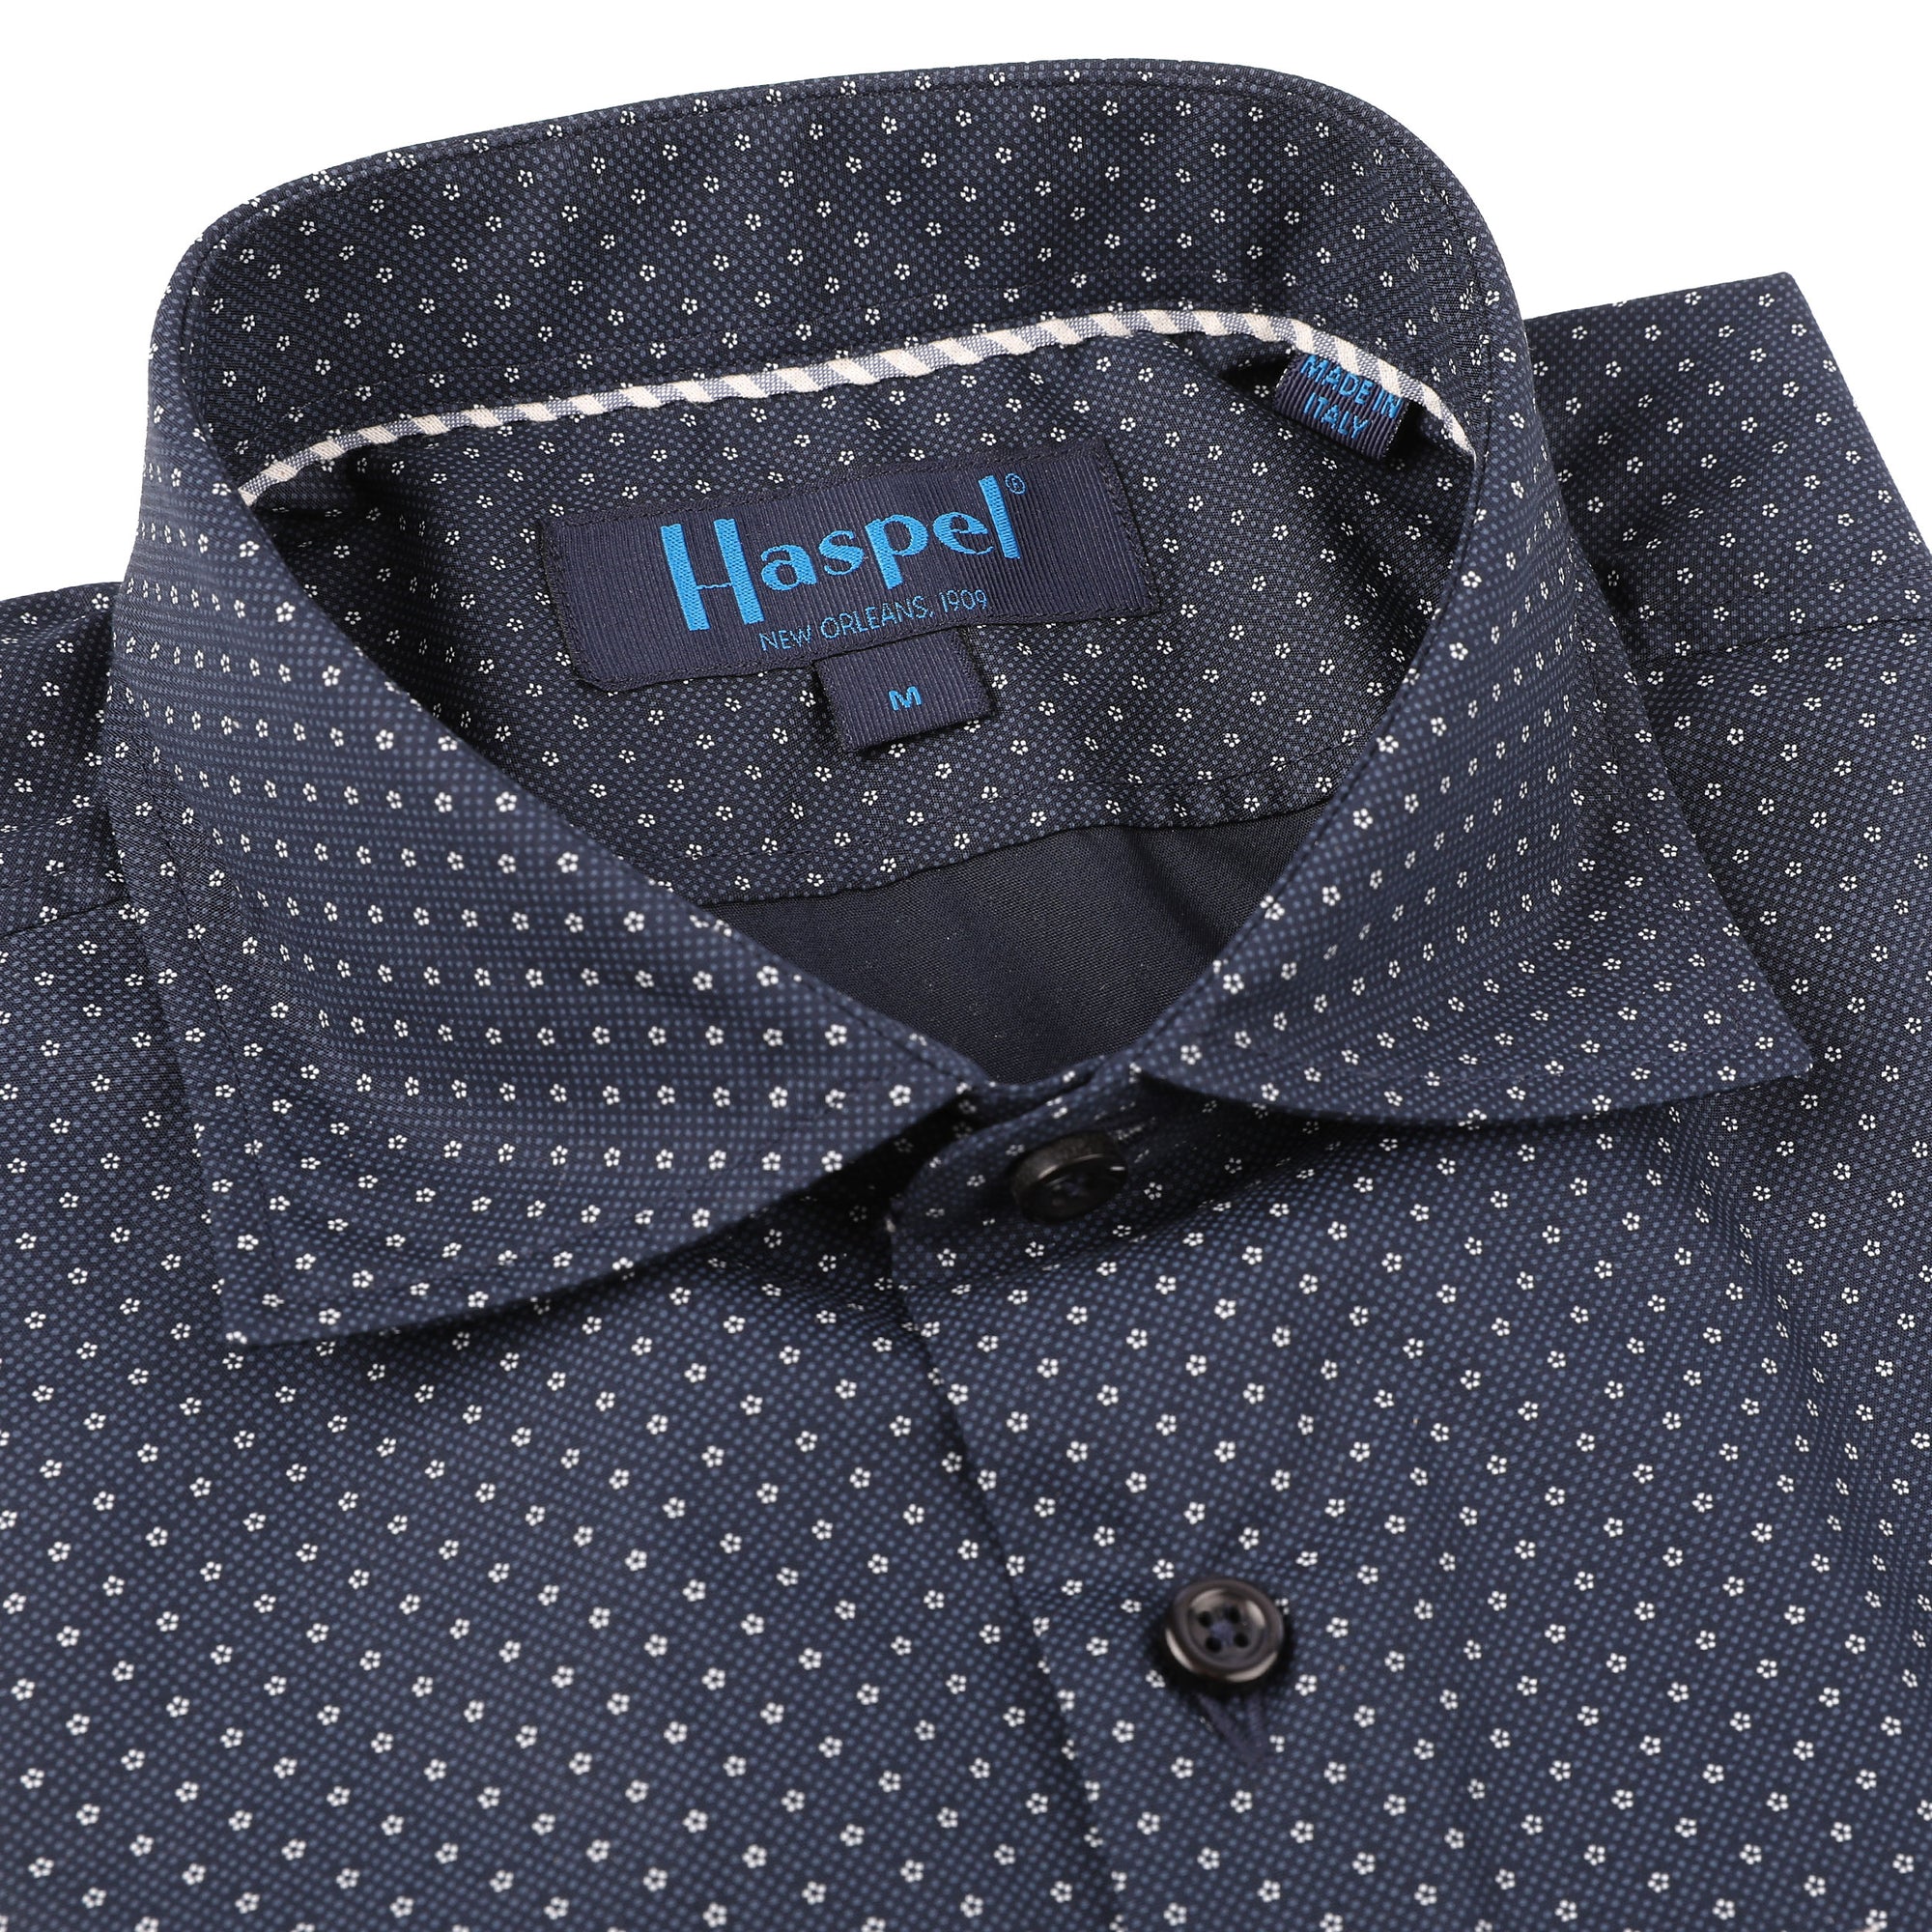 This Erato Navy Texture with White Dot sport shirt will keep you comfortable and stylish. It is made of a soft micro dot patterned material that is breathable and lightweight. You will look sharp while staying cool and comfortable.  100% Cotton • Spread Collar • Long Sleeve • Contrast Buttons • French Placket • Machine Washable • Made in Italy • Return Policy